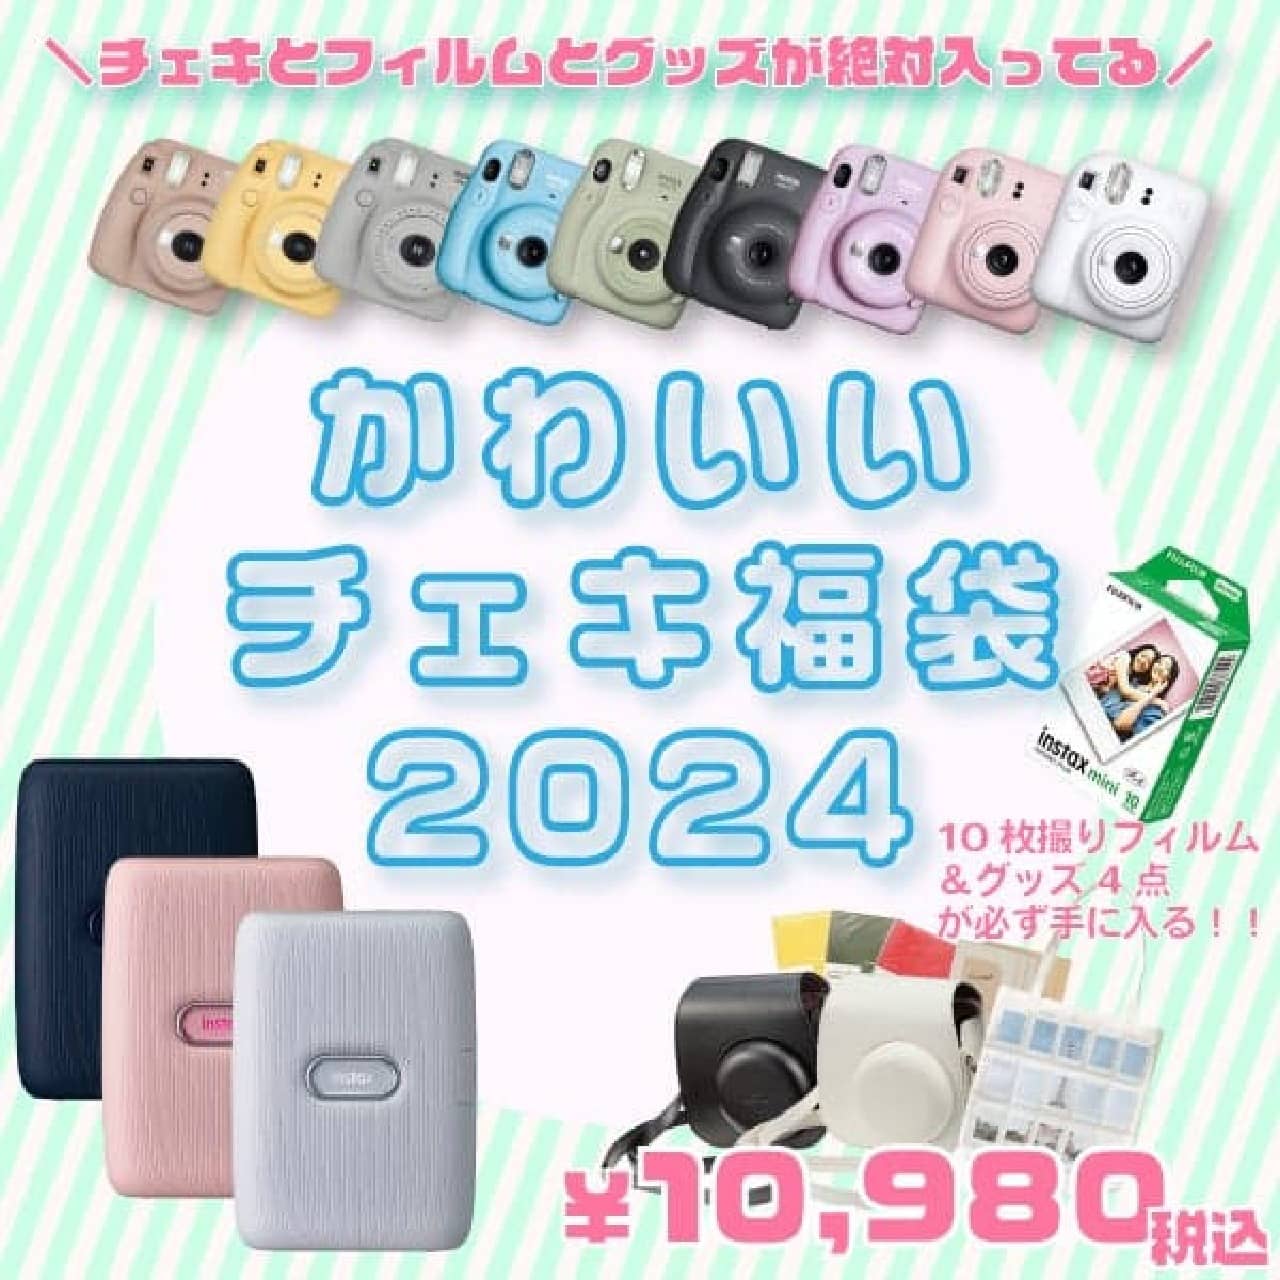 Village Vanguard Exclusive! Cheki Fukubukuro, a set of cheki grab bags for new life, will be on sale from April 12, 2023, and comes with a set of luxury goods Image 2